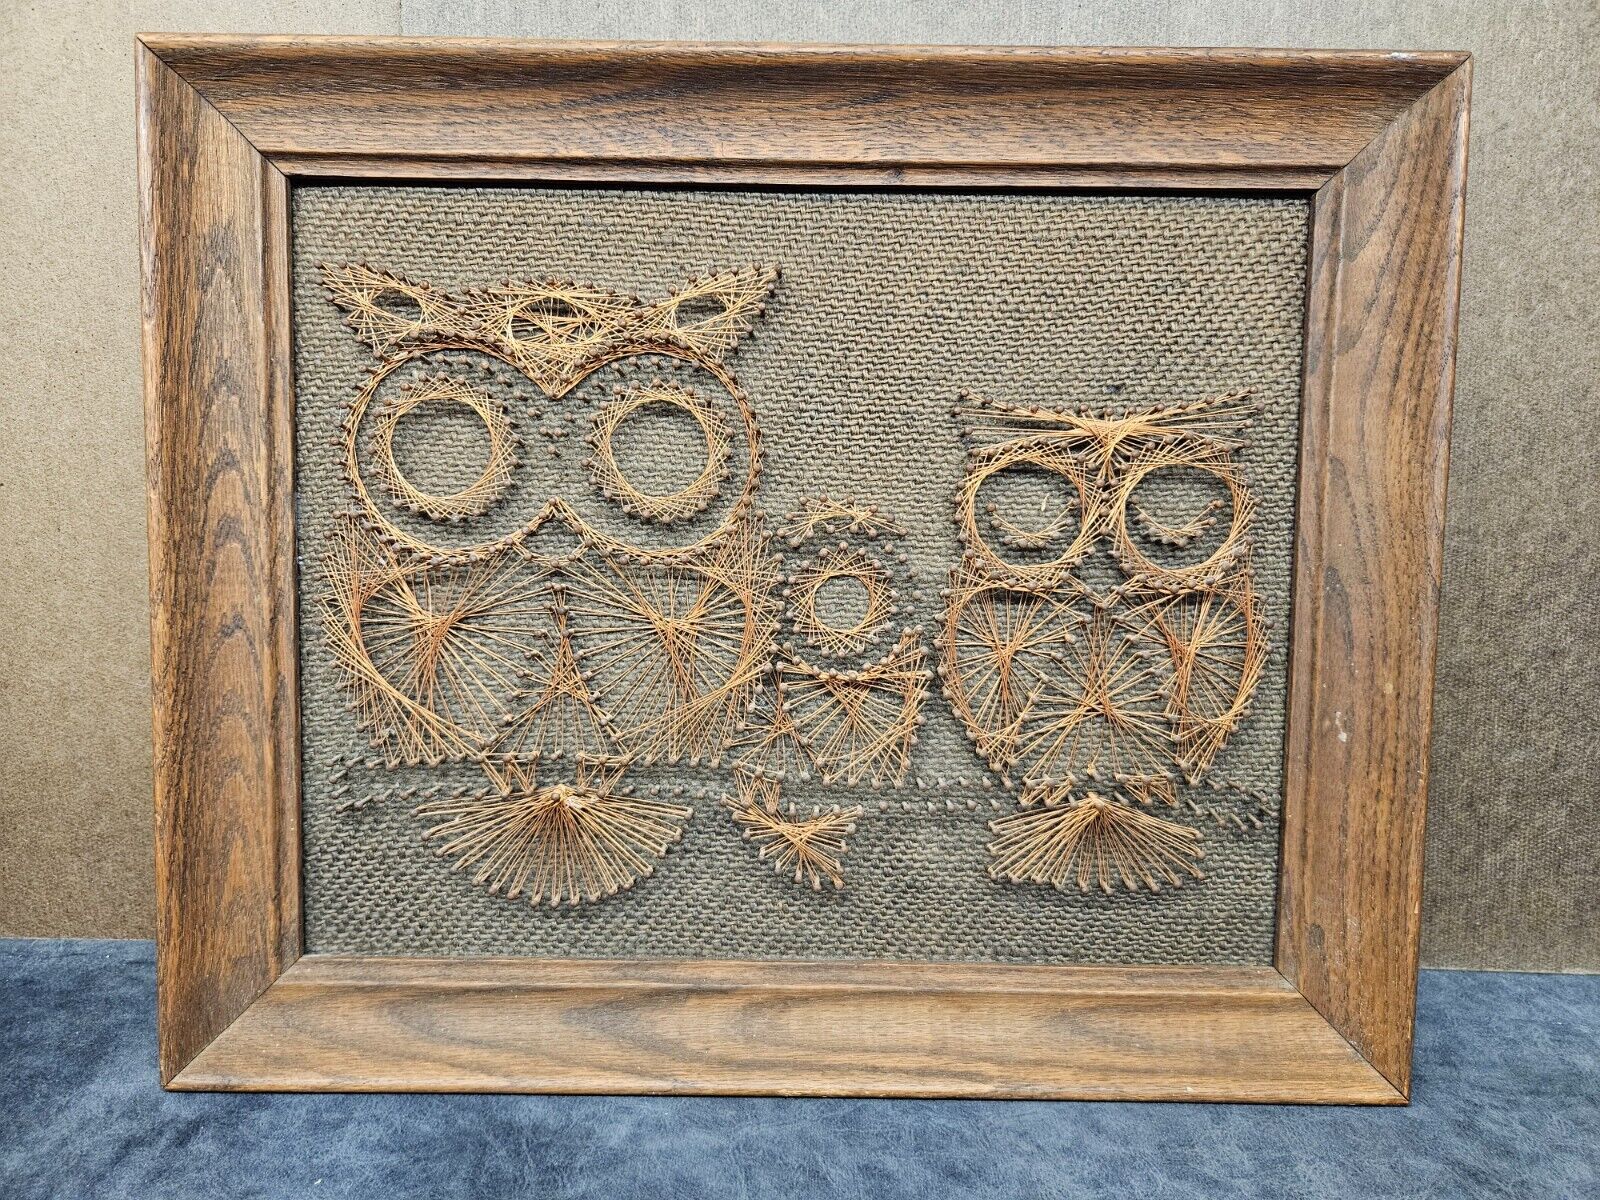 Vintage Framed MCM Copper Wire Craft String Art Wall Decor Owls Grannycore Retro